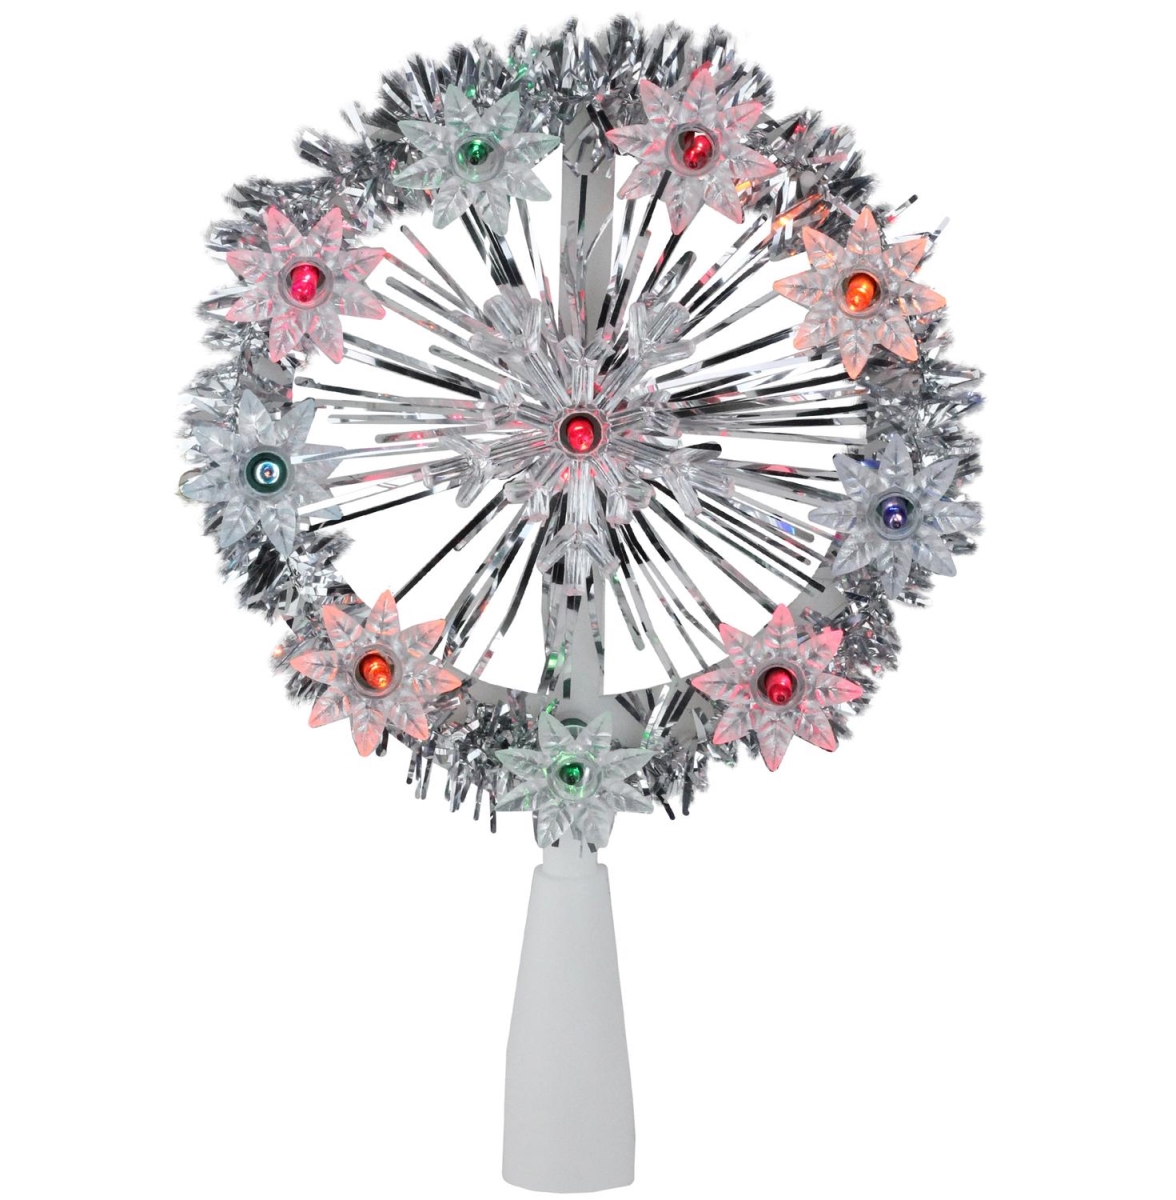 Picture of Northlight 32606339 7 in. Silver Tinsel Snowflake Starburst Christmas Tree Topper - Multi Lights